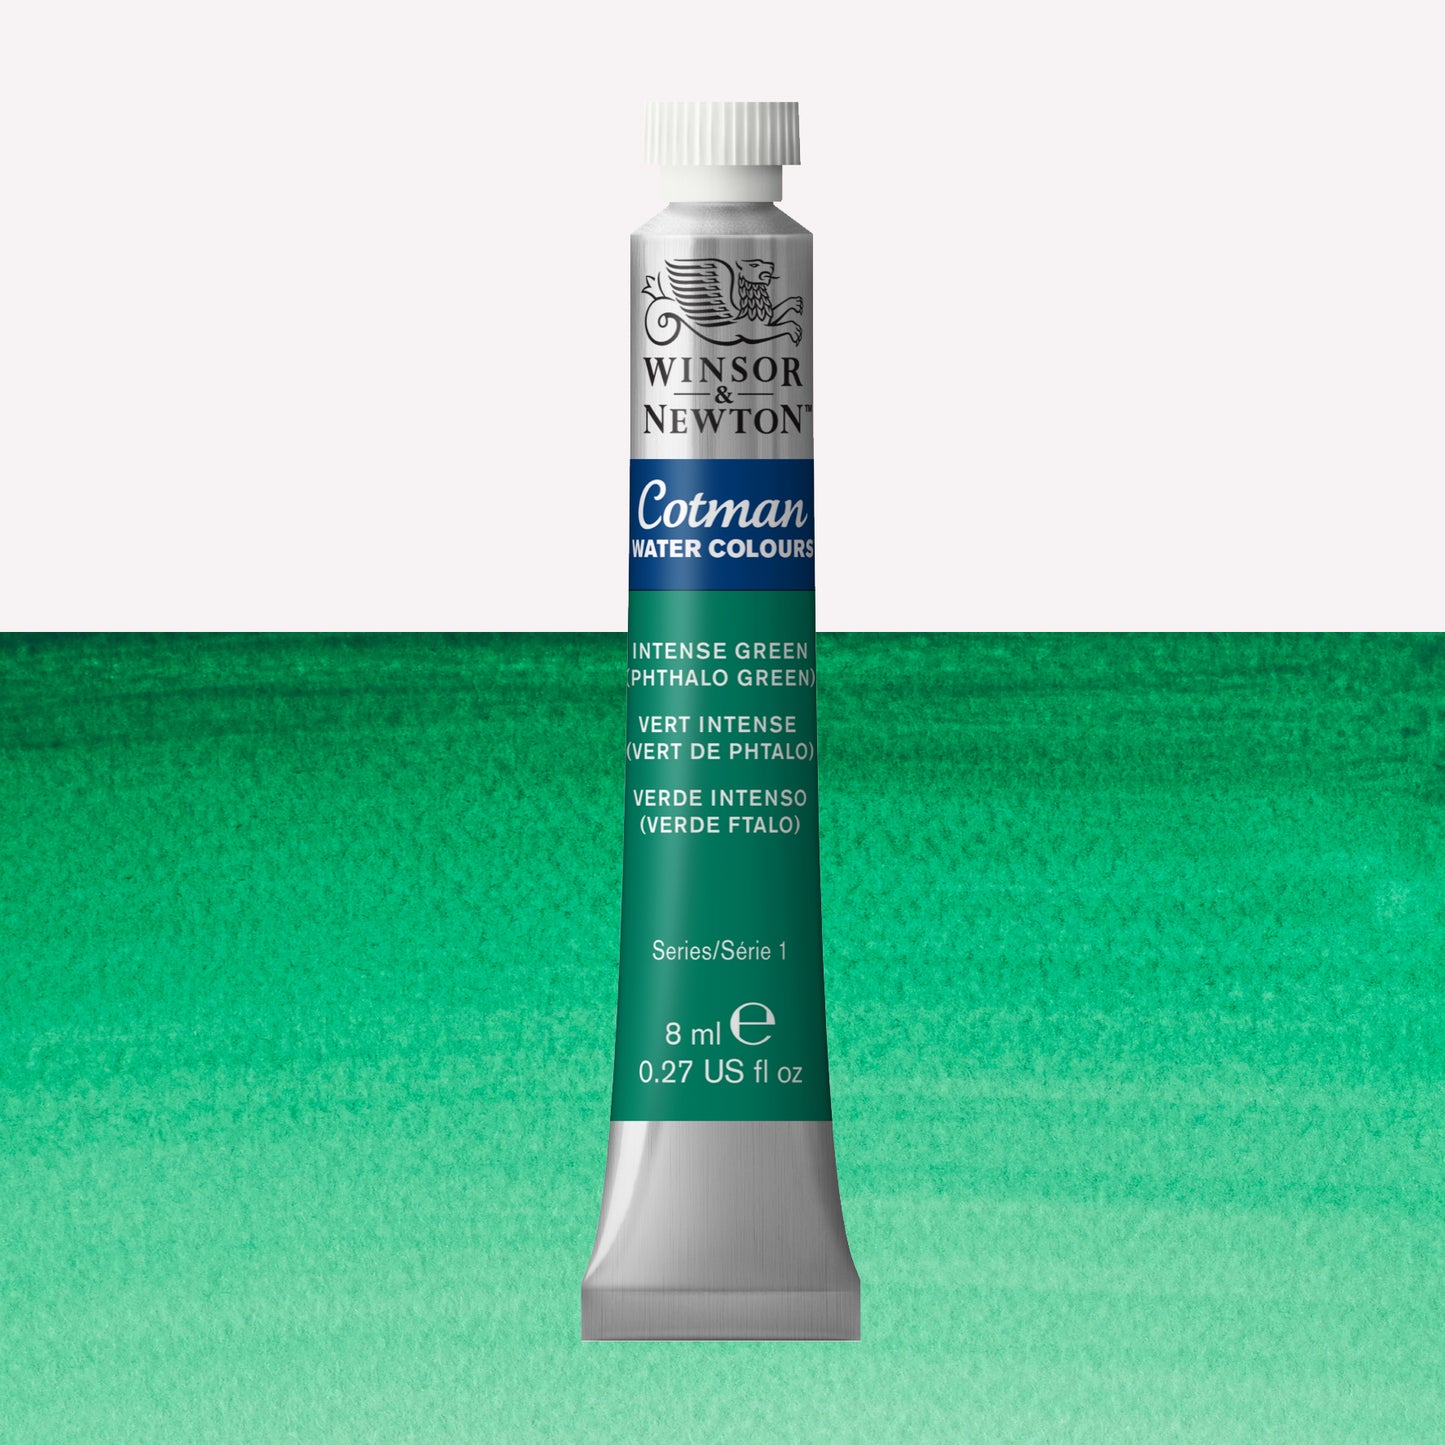 Winsor & Newton Cotman watercolour paint packaged in 8ml silver tube with a white lid in the shade Intense (phthalo) Green over a highly pigmented colour swatch.